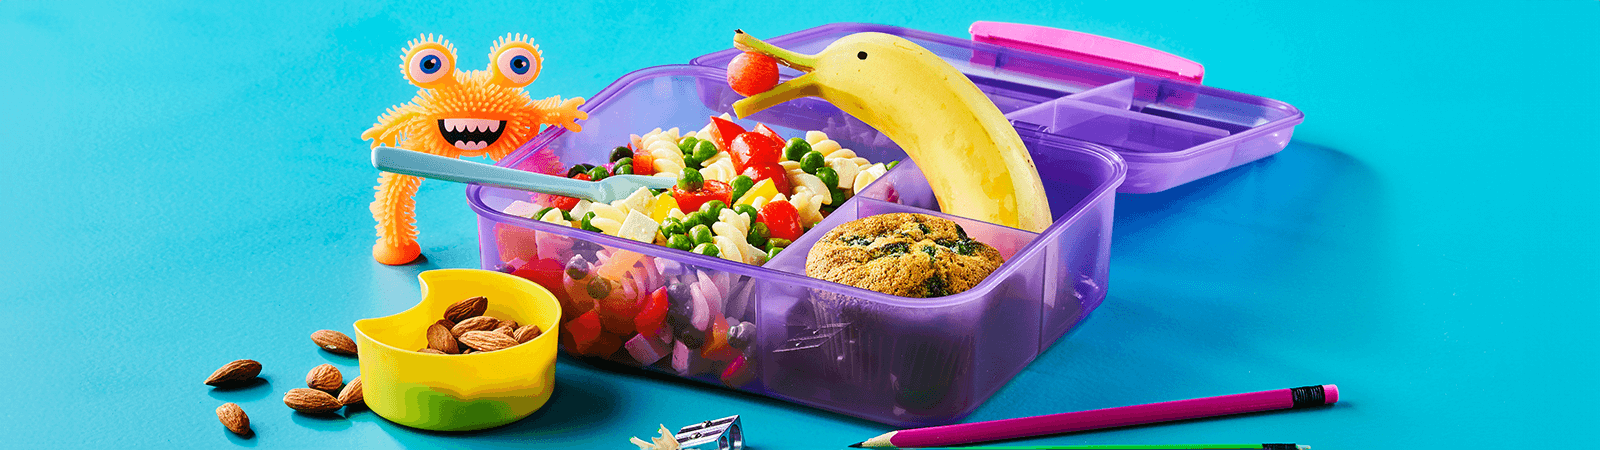 Lunch Box with Pasta Salad and Blueberry Muffin - Emborg 